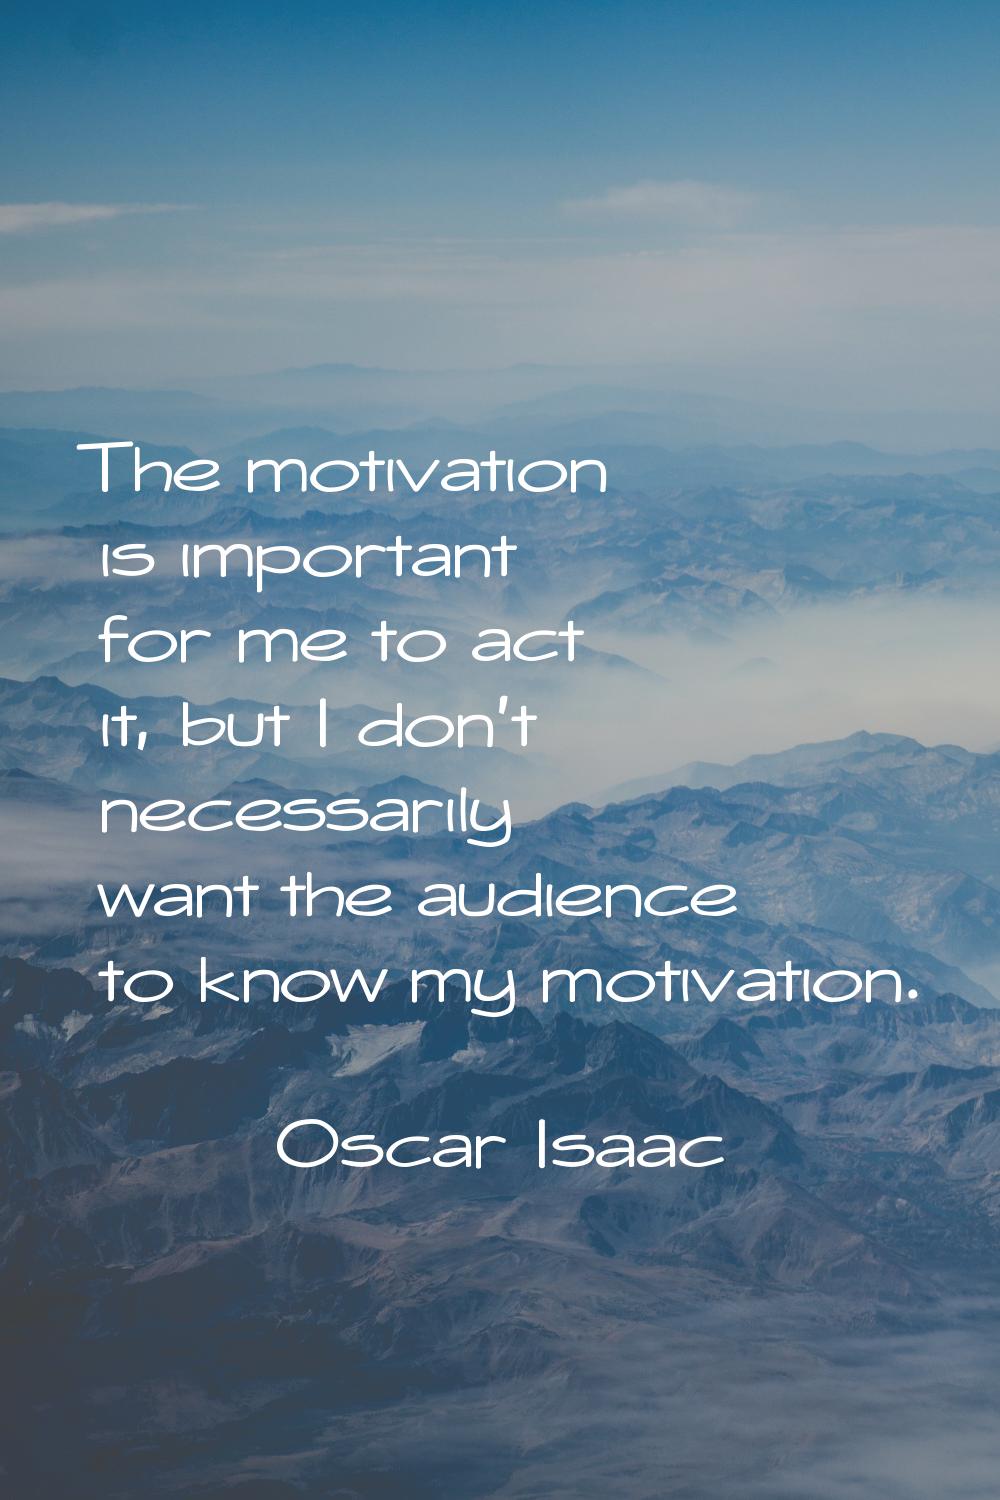 The motivation is important for me to act it, but I don't necessarily want the audience to know my 